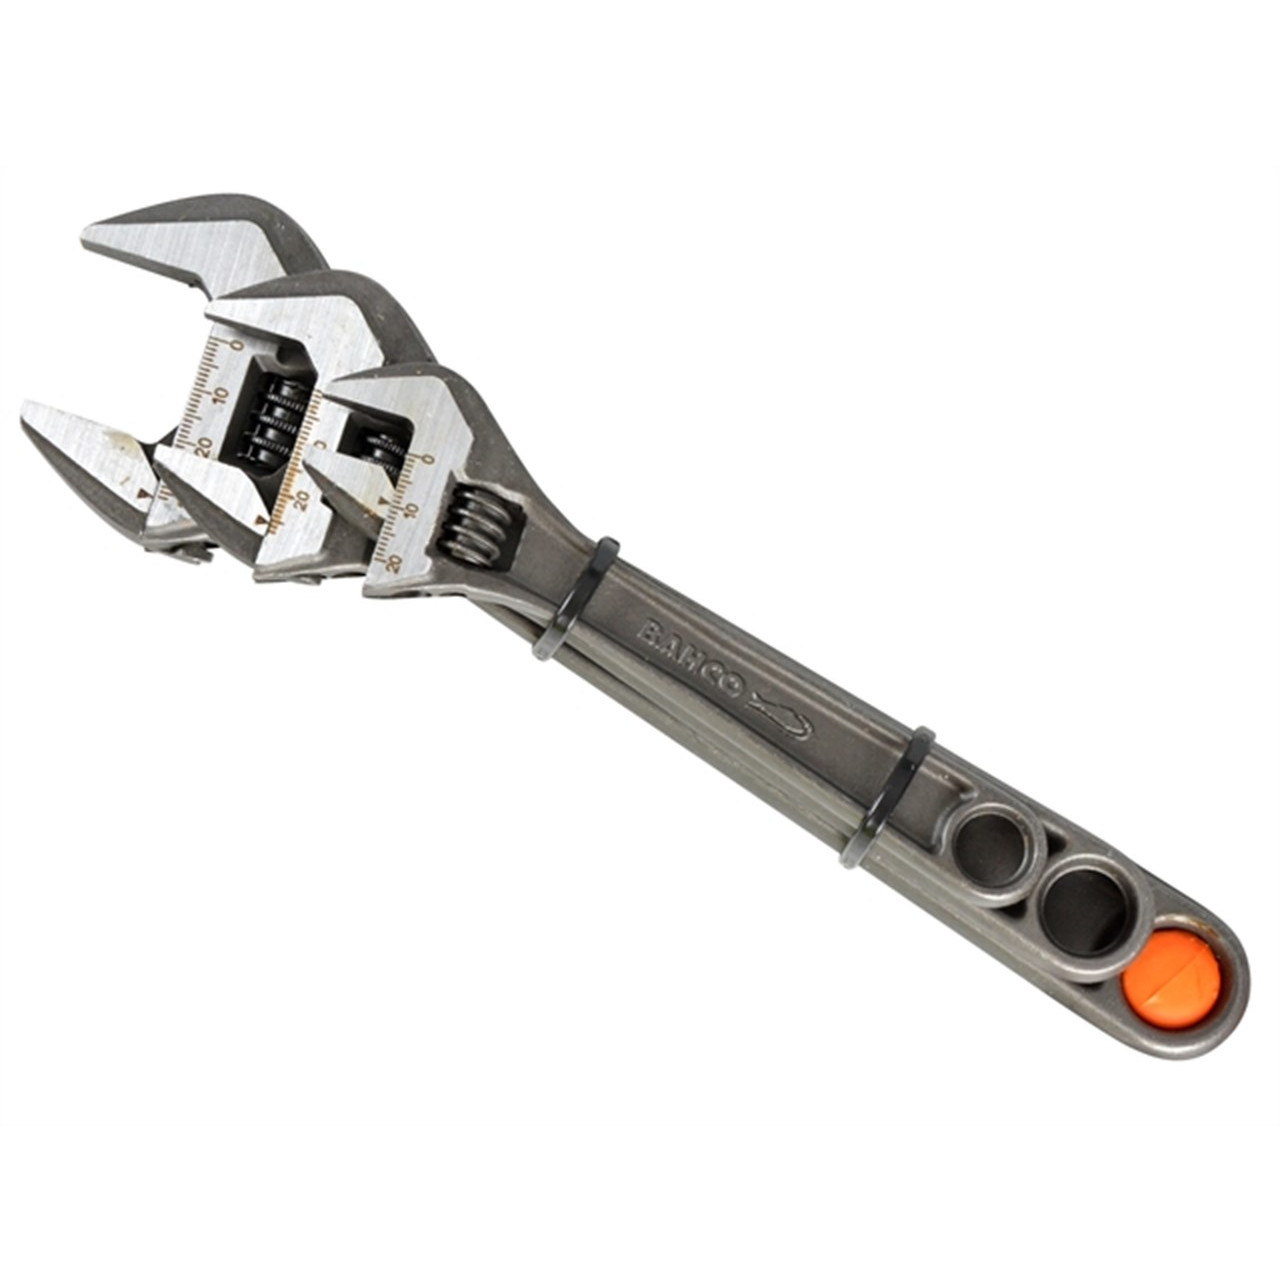 8 Best Adjustable Wrenches Review